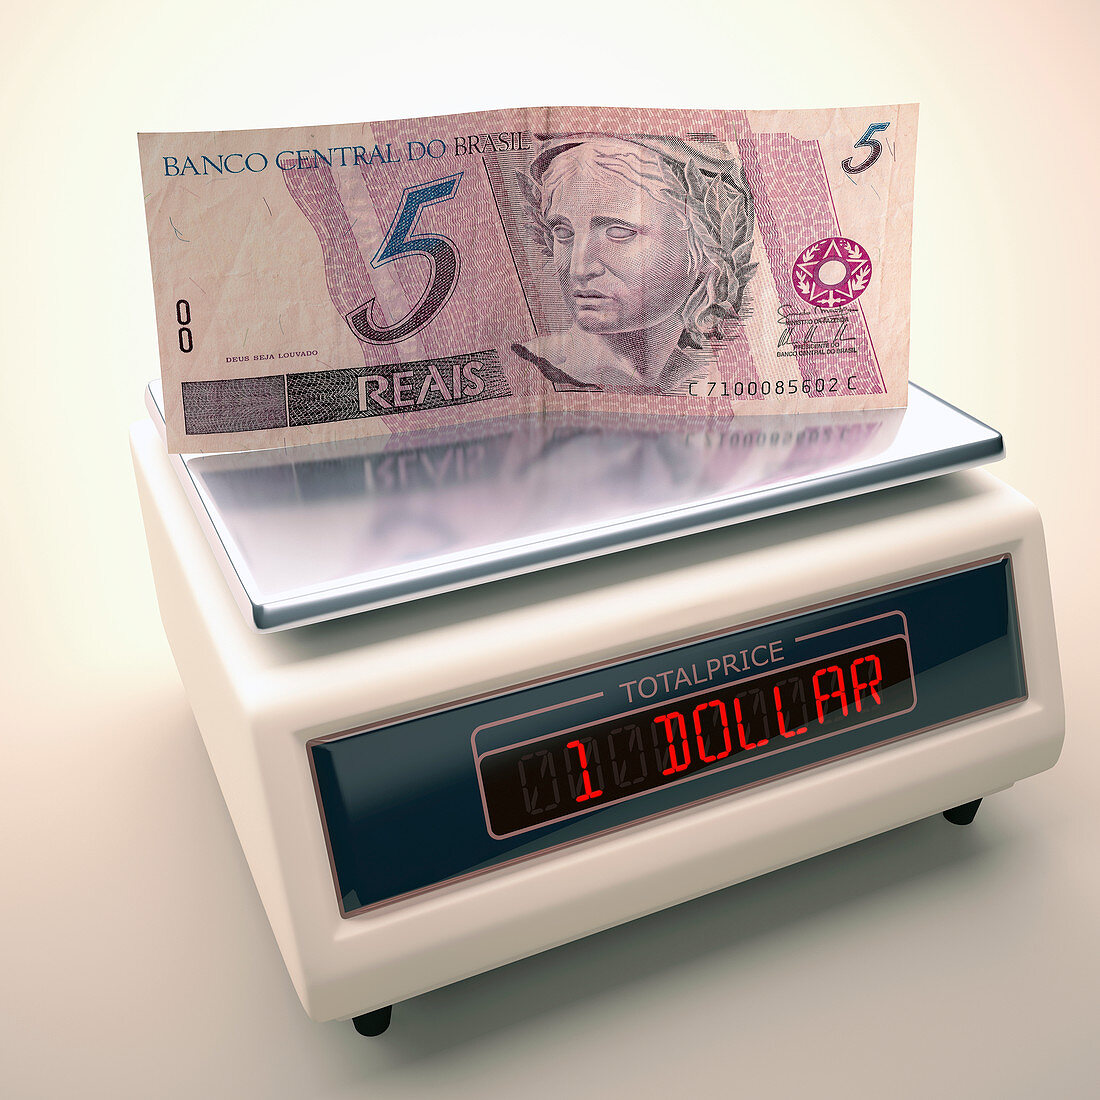 Banknote on scales,illustration